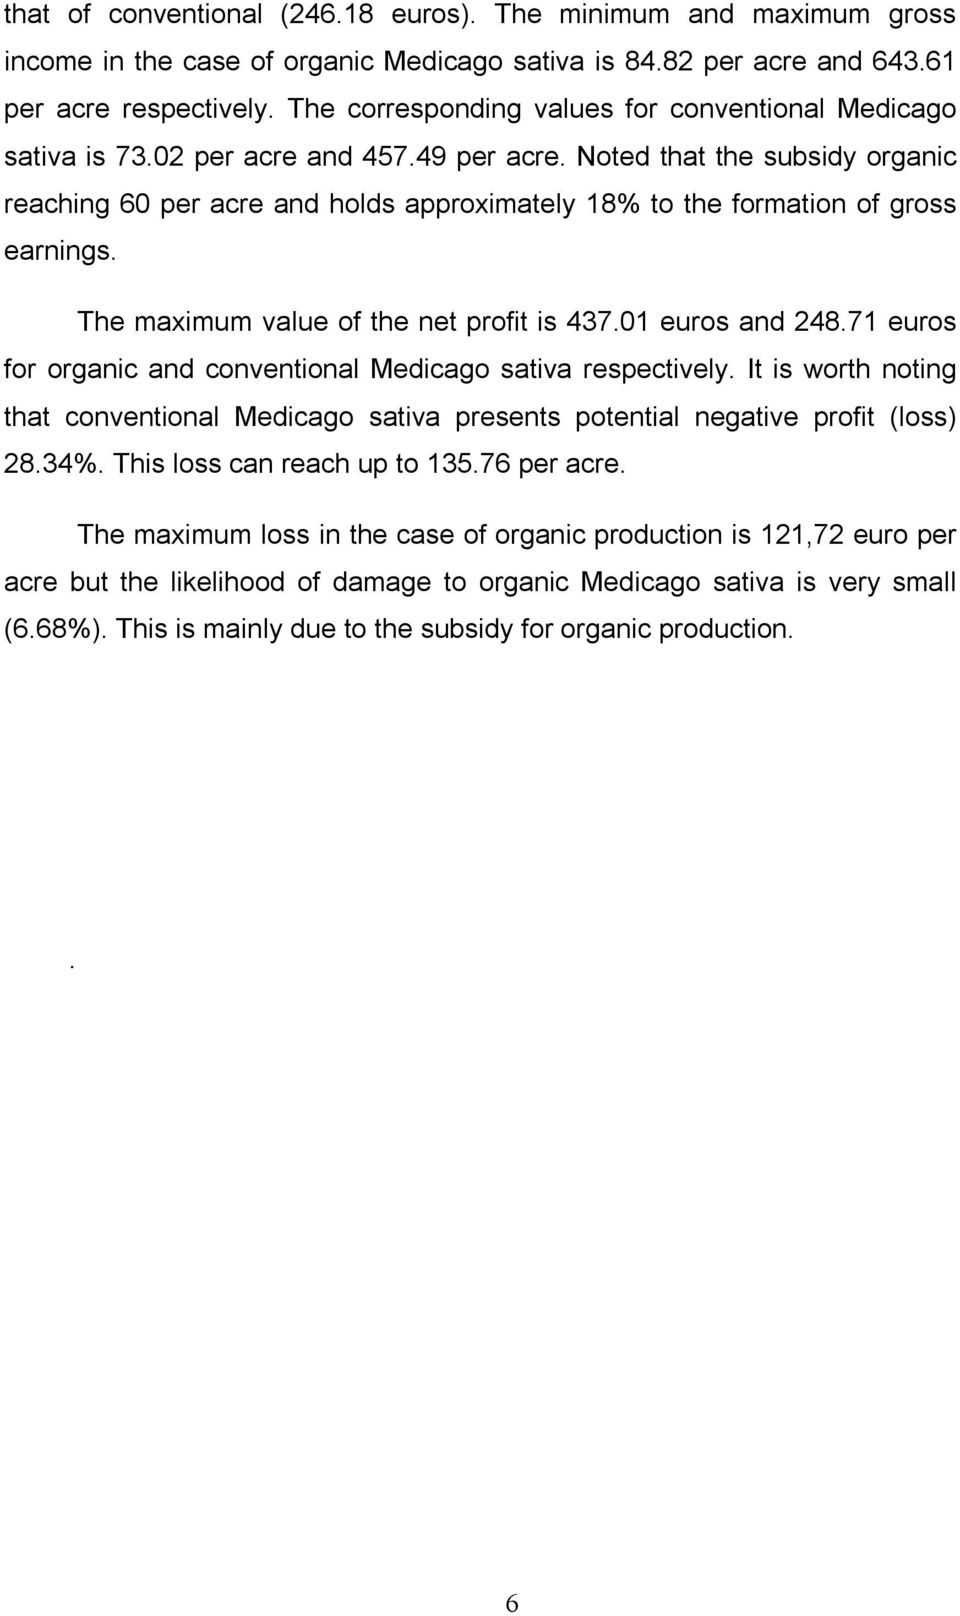 Noted that the subsidy organic reaching 60 per acre and holds approximately 18% to the formation of gross earnings. The maximum value of the net profit is 437.01 euros and 248.